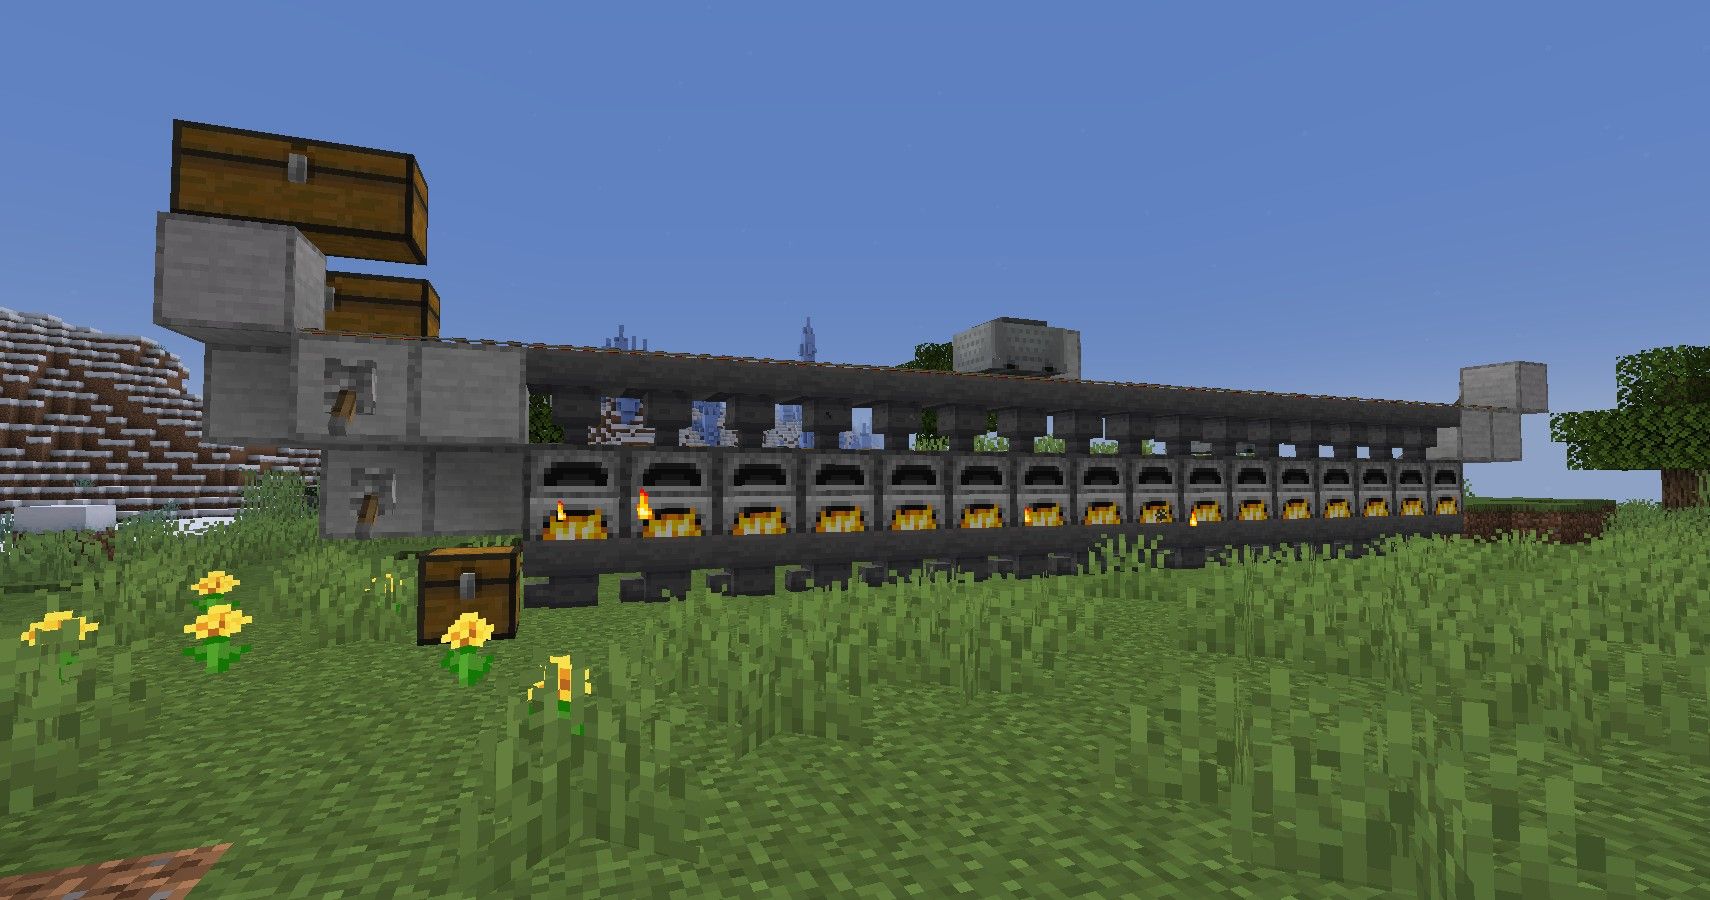 Completed minecraft super smelter in action